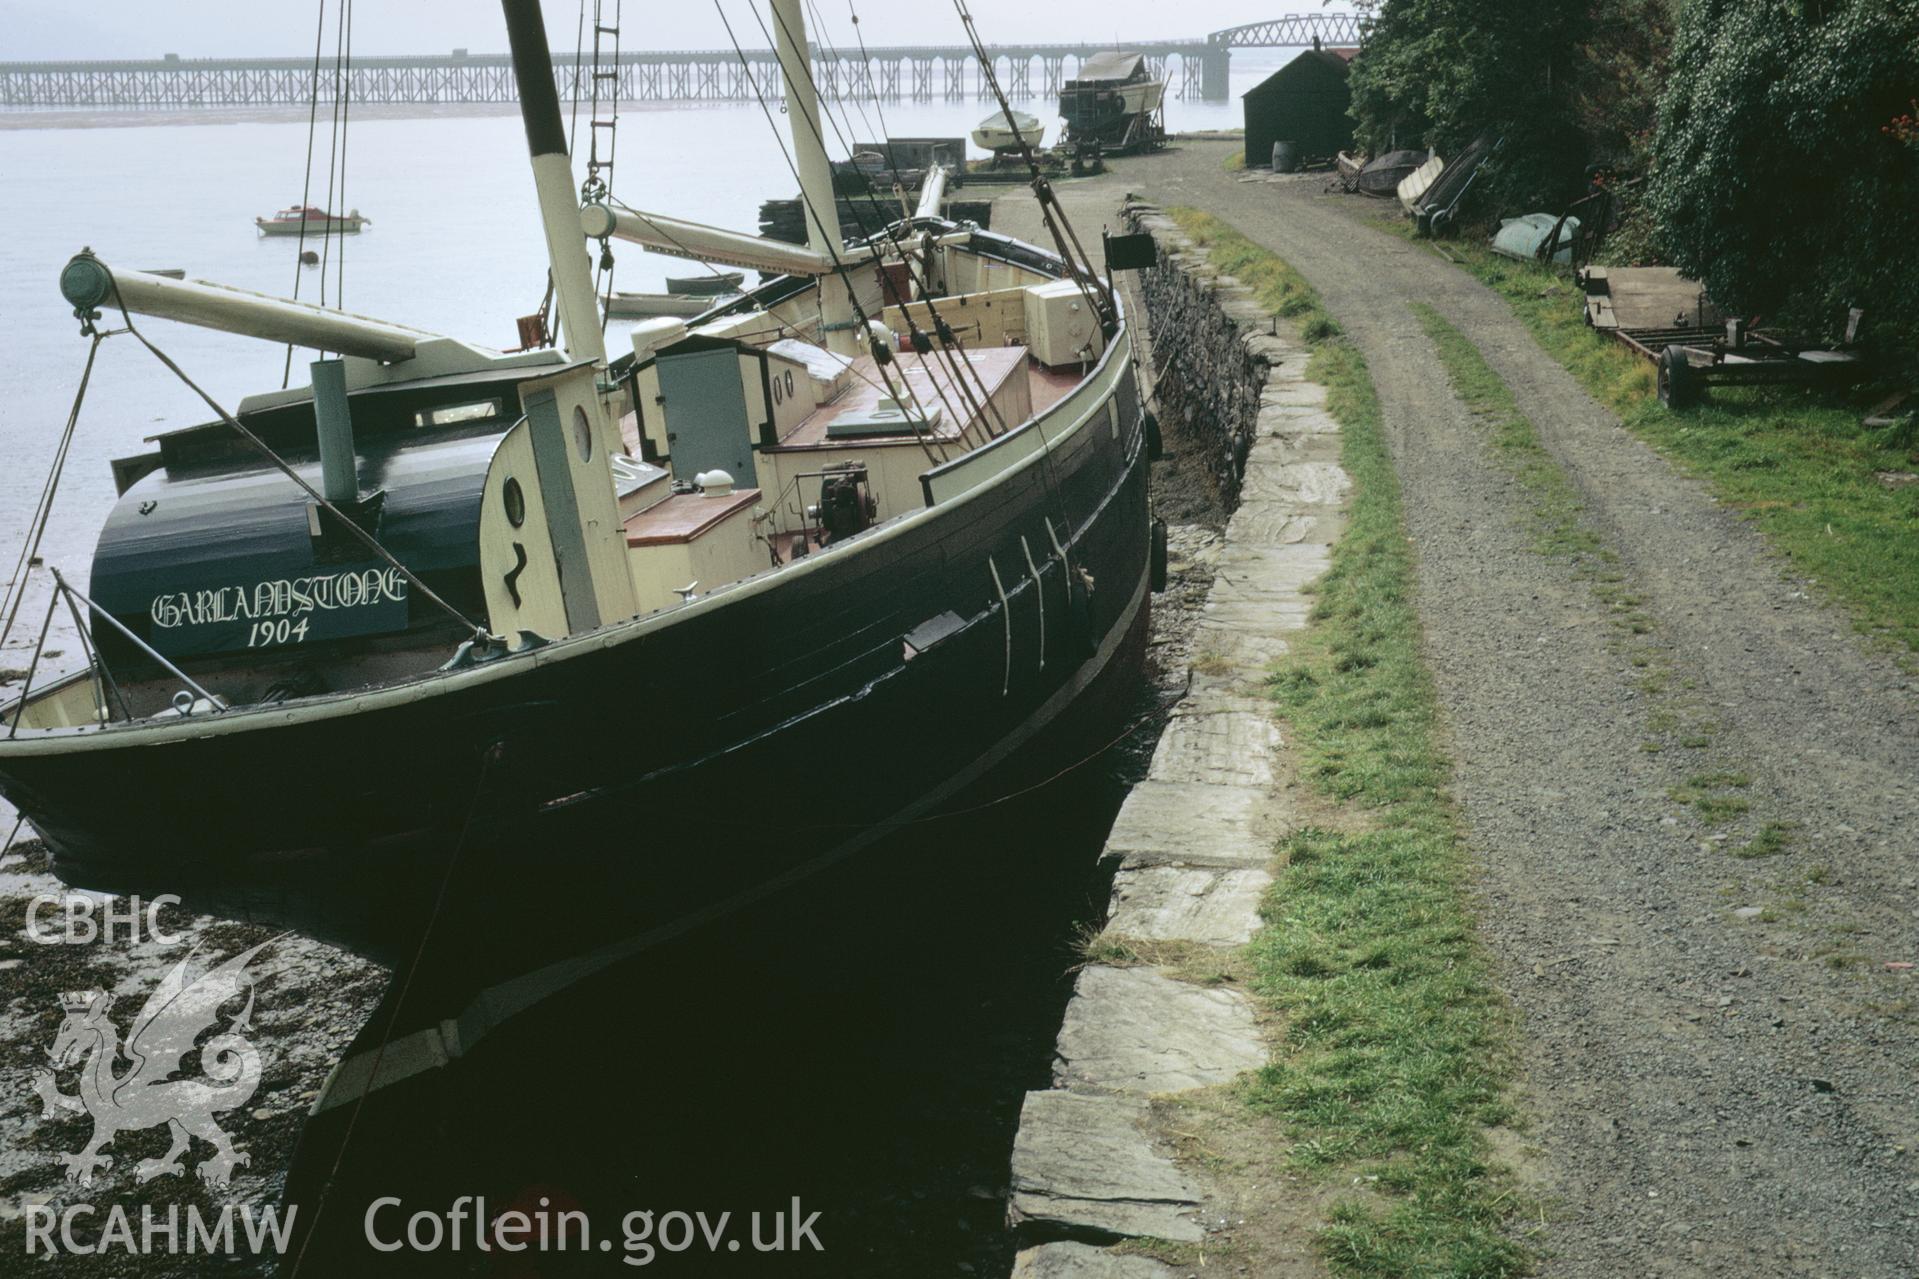 35mm colour slide showing a fishing boat, at the Tidal Quay, Barmouth Harbour, Merionethshire by Dylan Roberts.